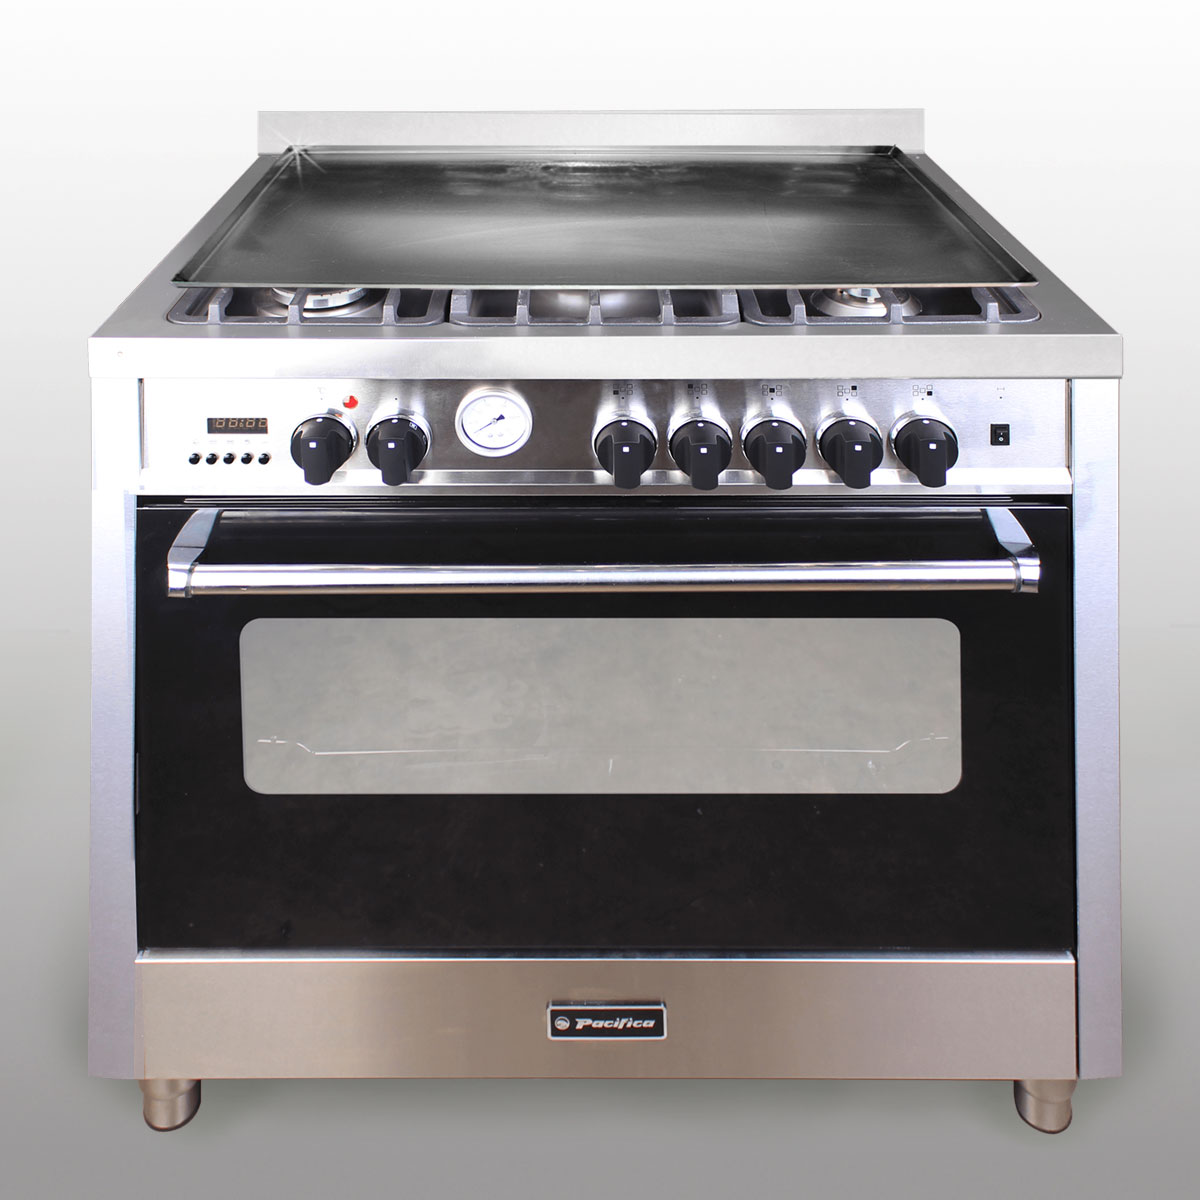 What Is The Standard Size Of A Stove Top